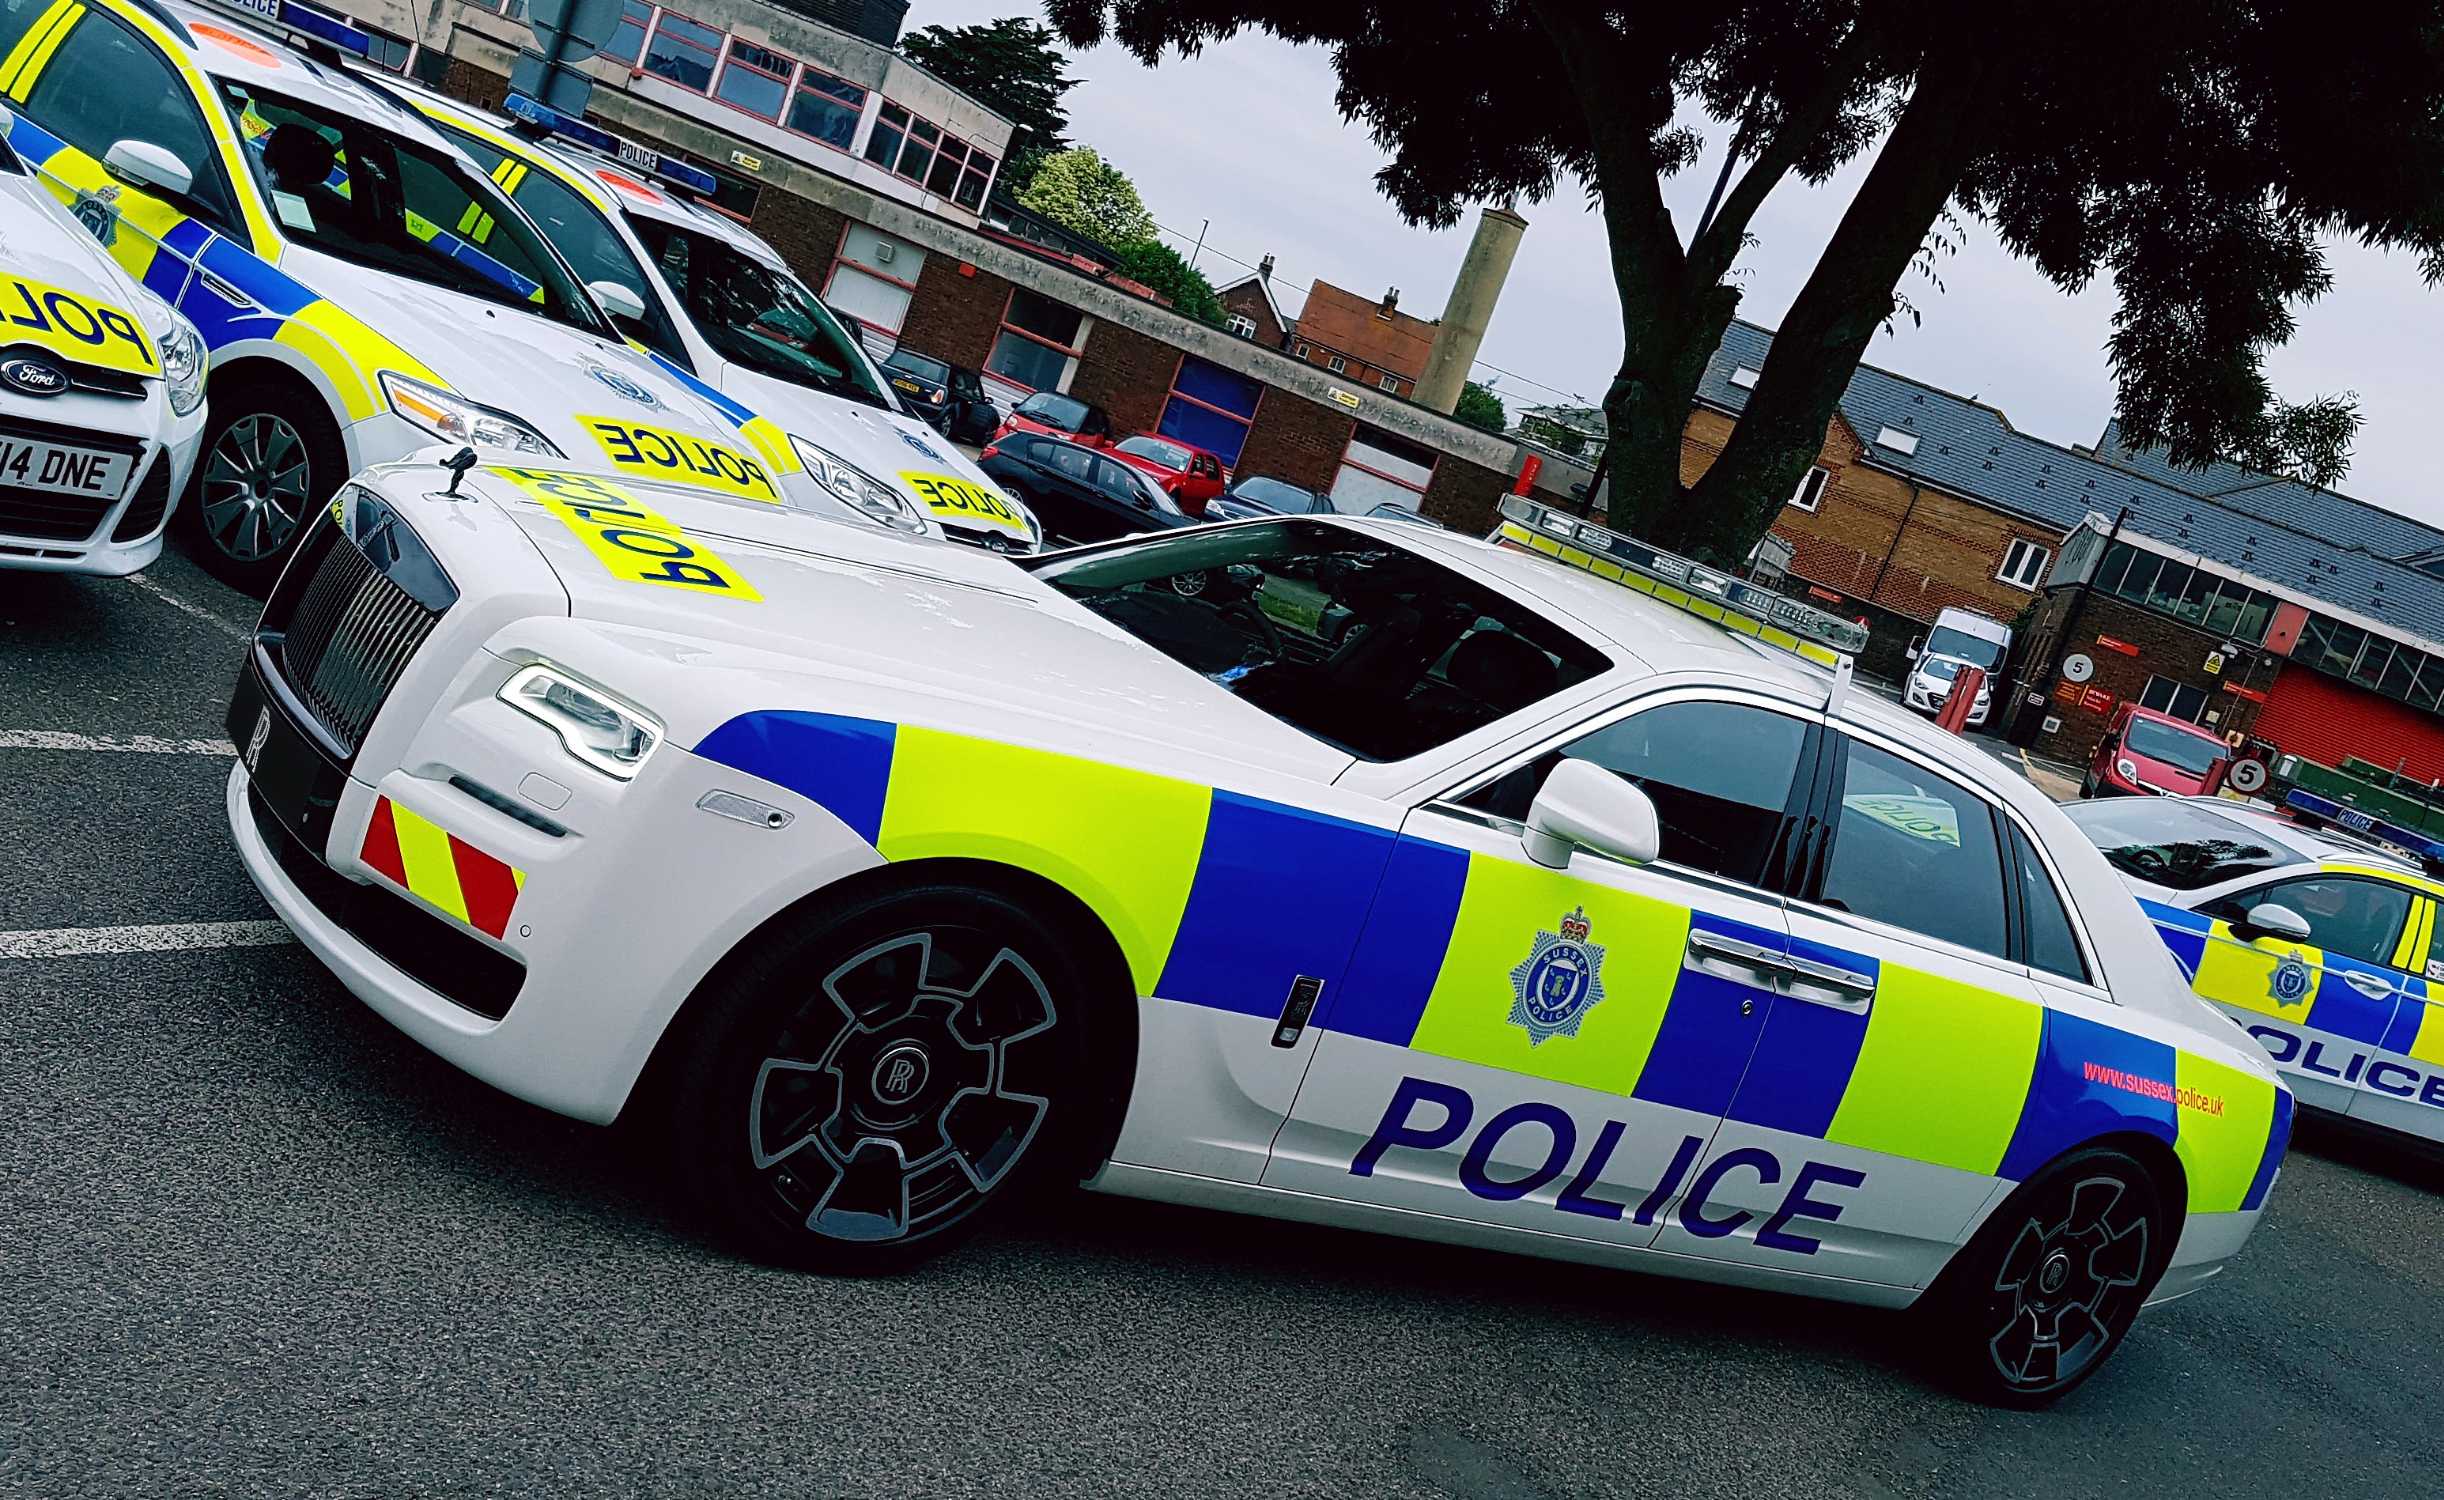 Rolls-royce Motor Cars Supports Sussex Police At The Ever-popular Chichester Police Station Open Day